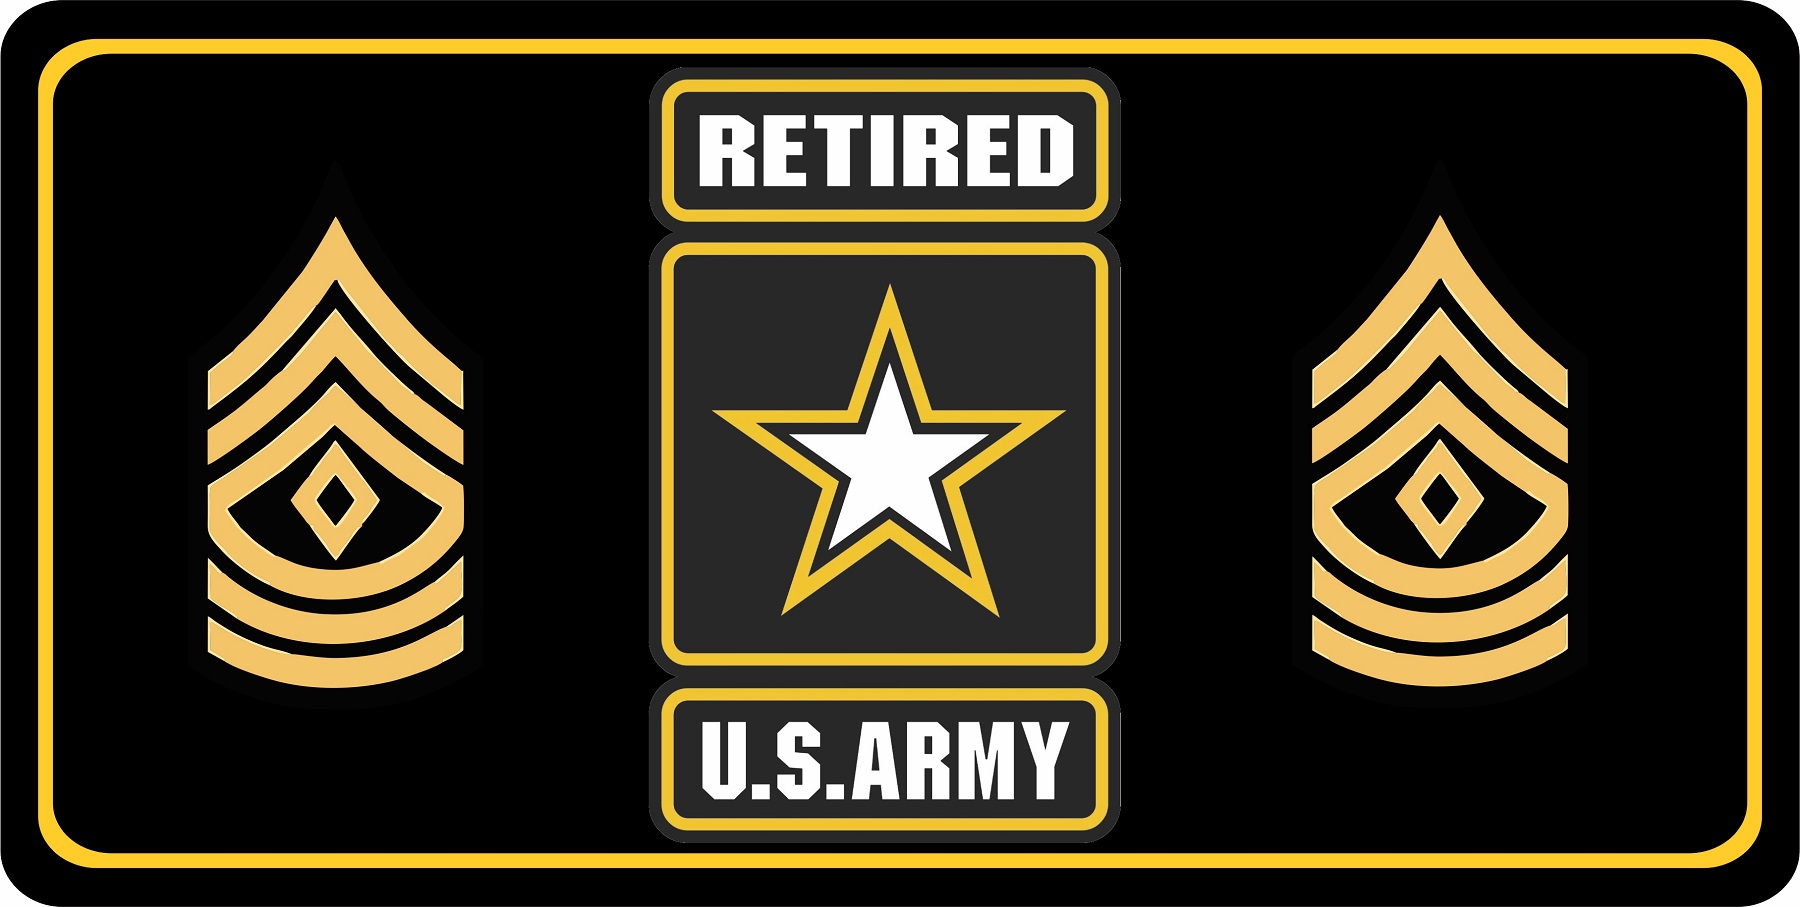 U.S. Army Retired First Sergeant Photo LICENSE PLATE